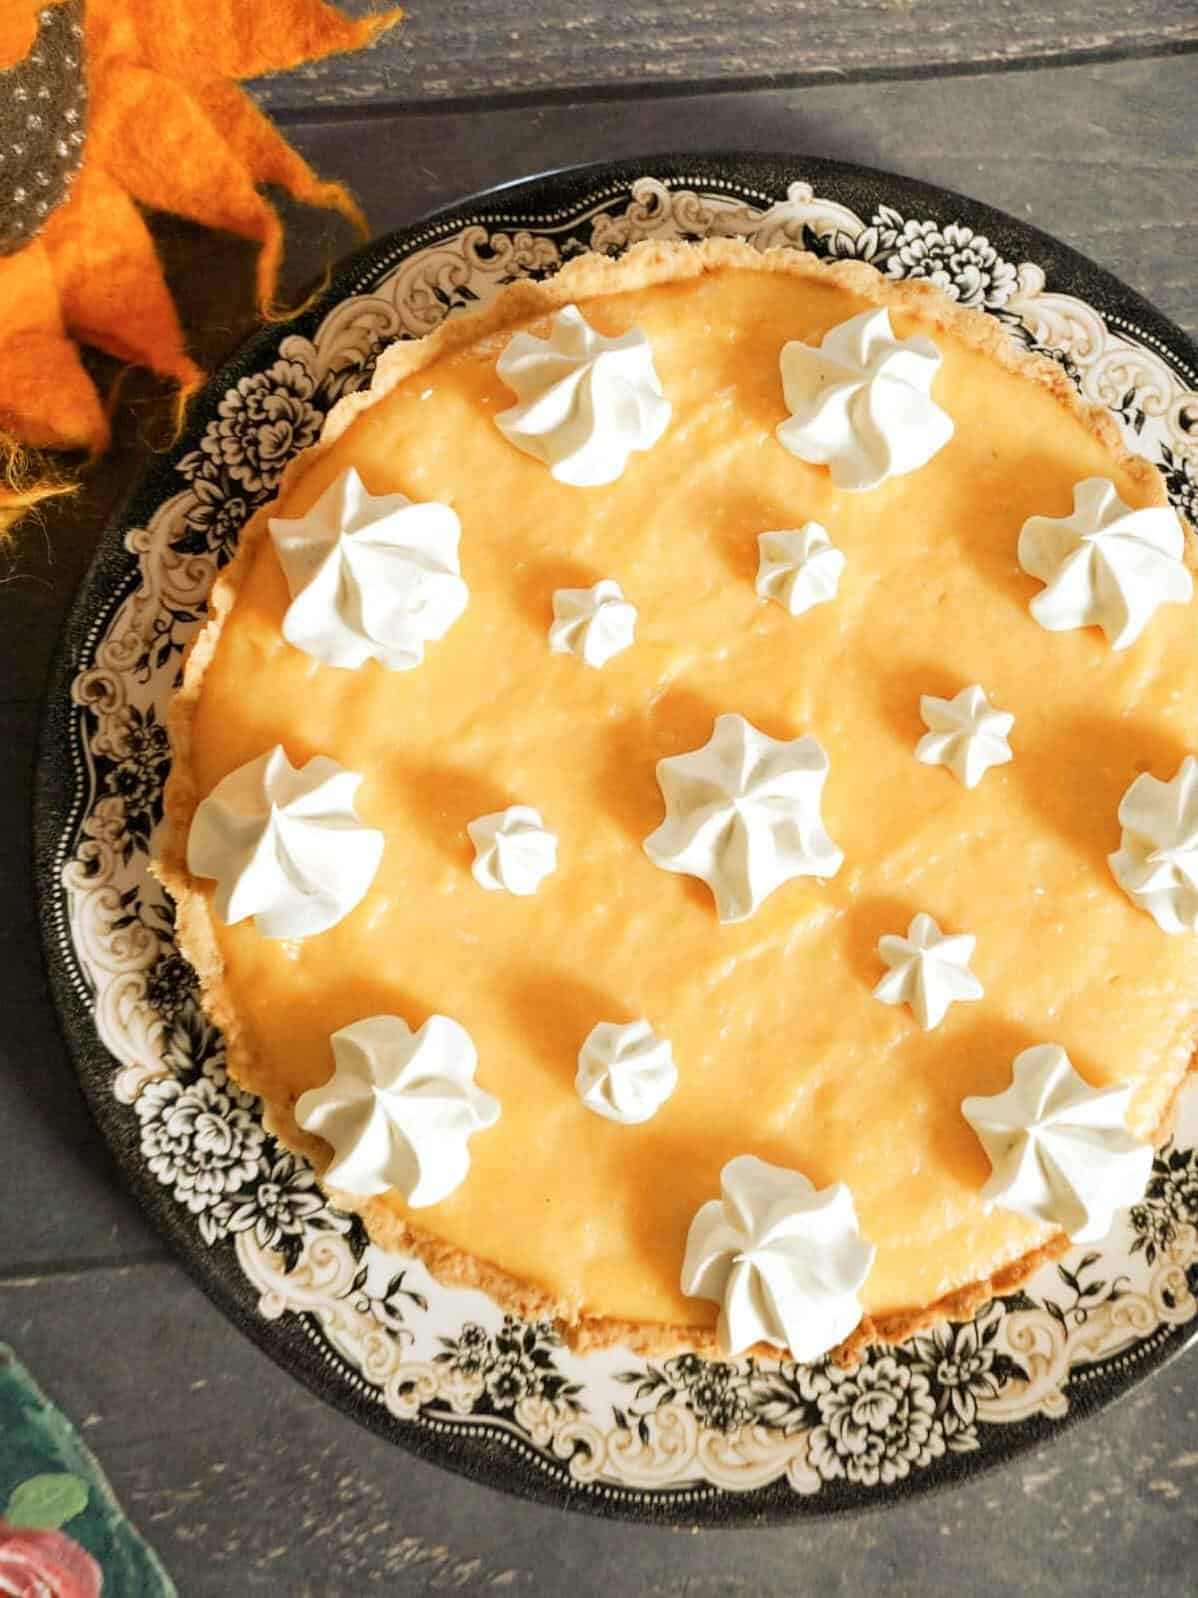  Sink your teeth into this decadent slice and experience a burst of refreshing cantaloupe flavor with every bite.